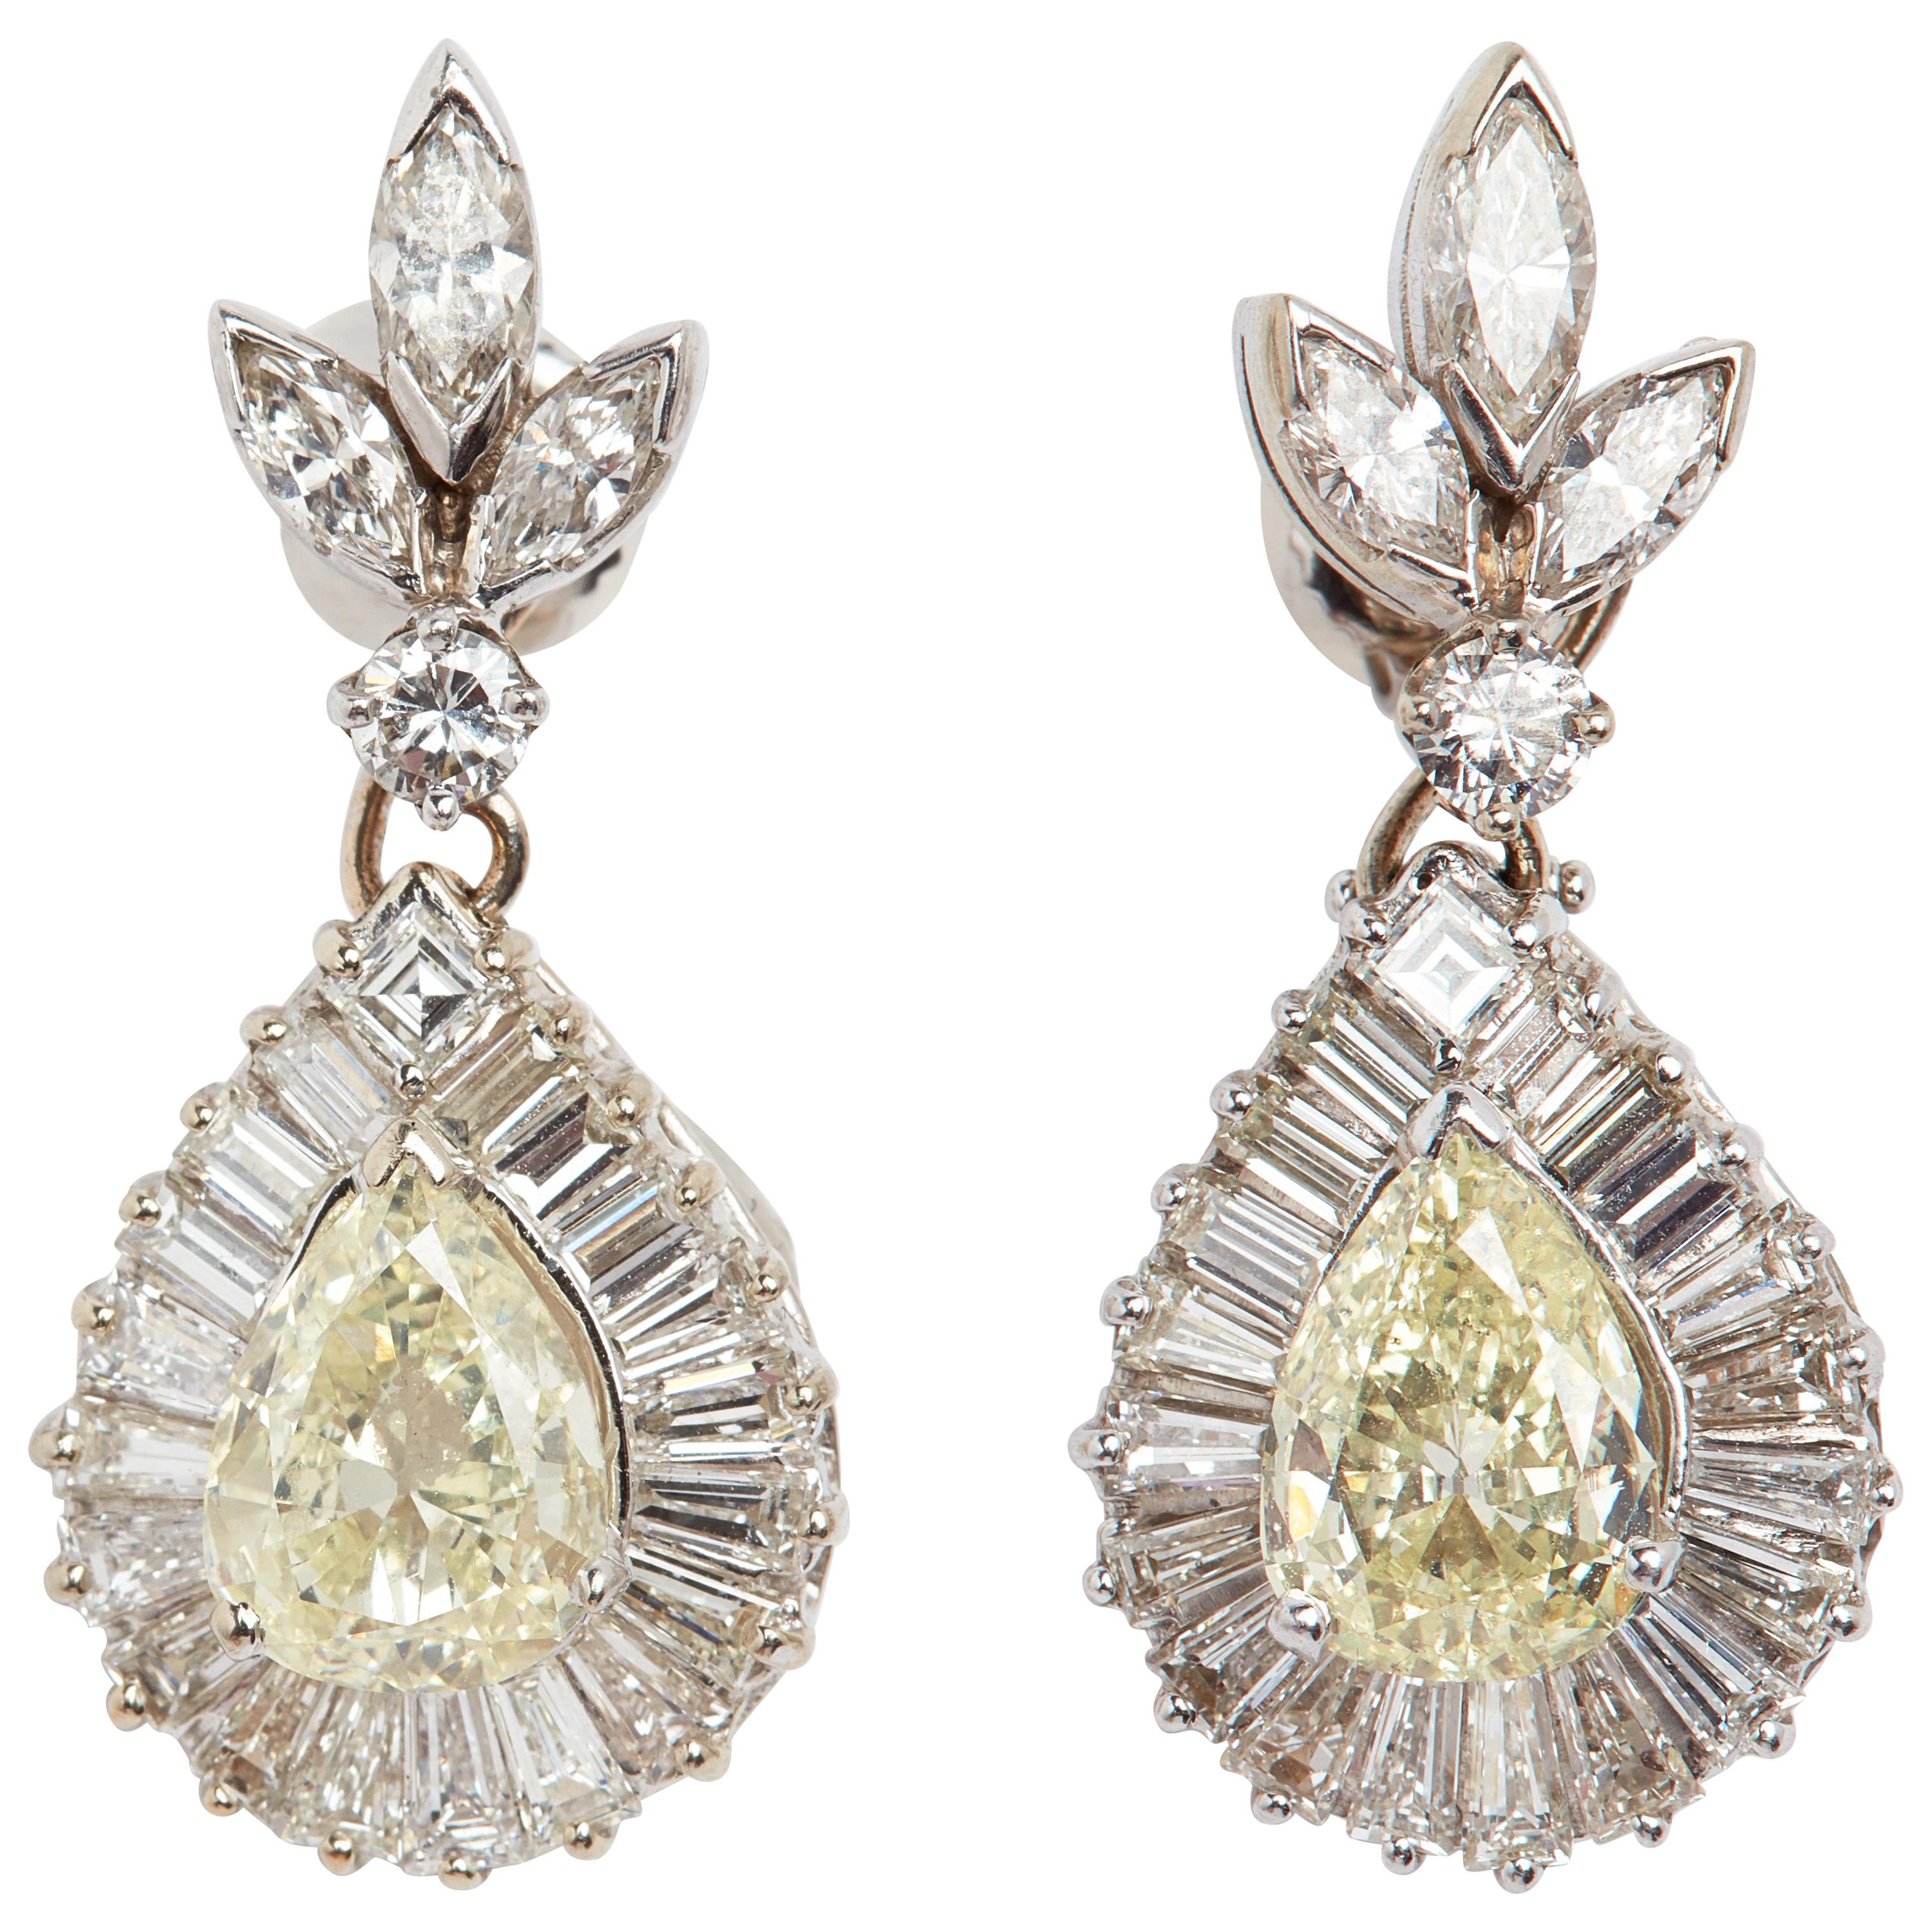 Natural Fancy Yellow and White Diamond Earrings with 18 Karat White Gold